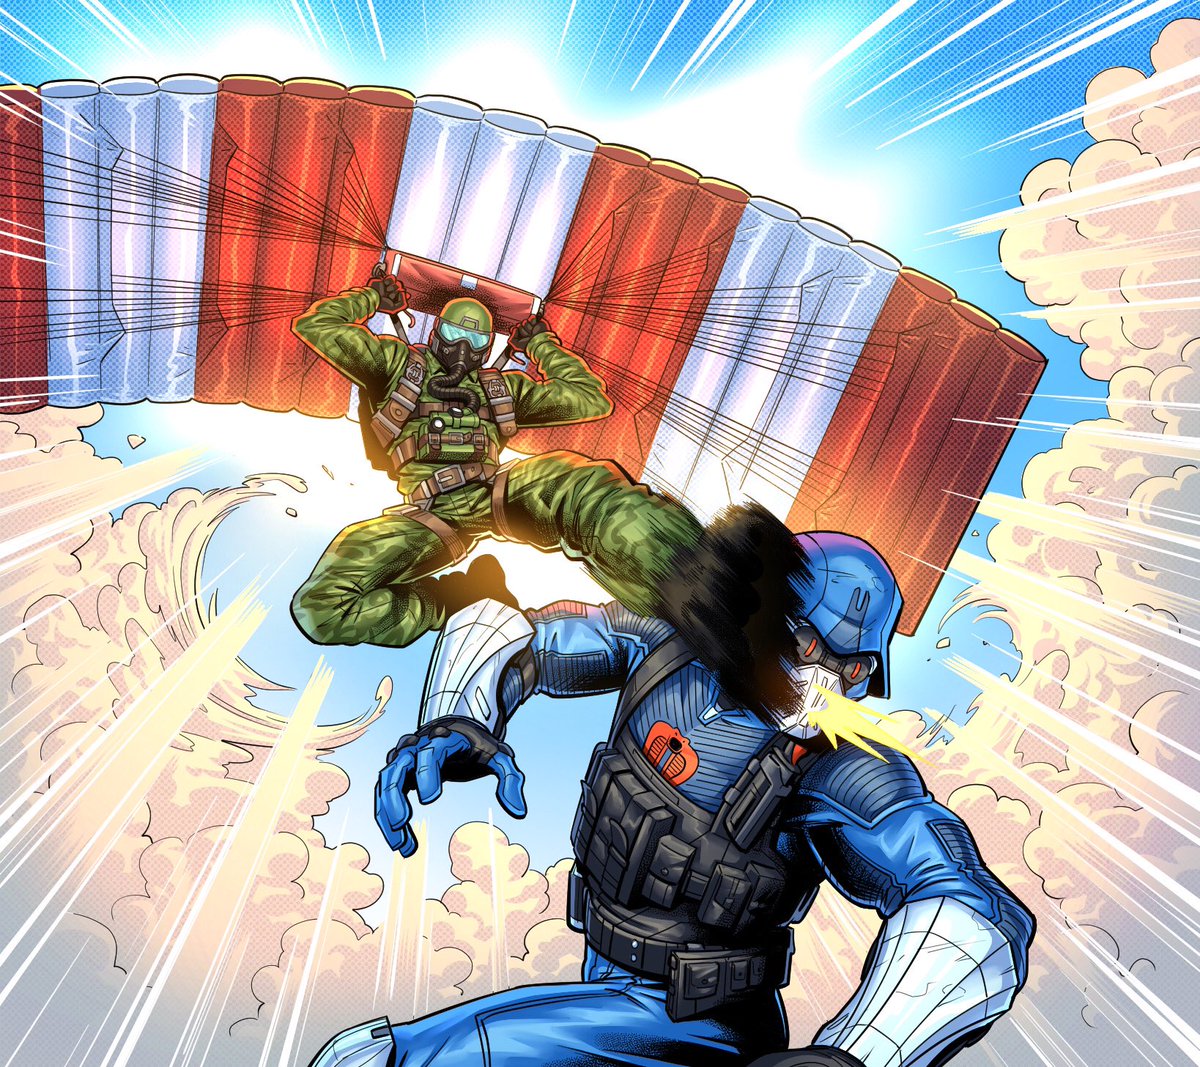 Here’s another new card piece I drew earlier in 2022 for the GI Joe Deck Building Game Mission Critical Expansion from @PlayRenegade ! 
Title: Parachute Assault. Ripcord is parachuting in and kicking a Cobra Trooper in the face. #gijoe #deckbuildinggame #ripcord #cobra #hasbro